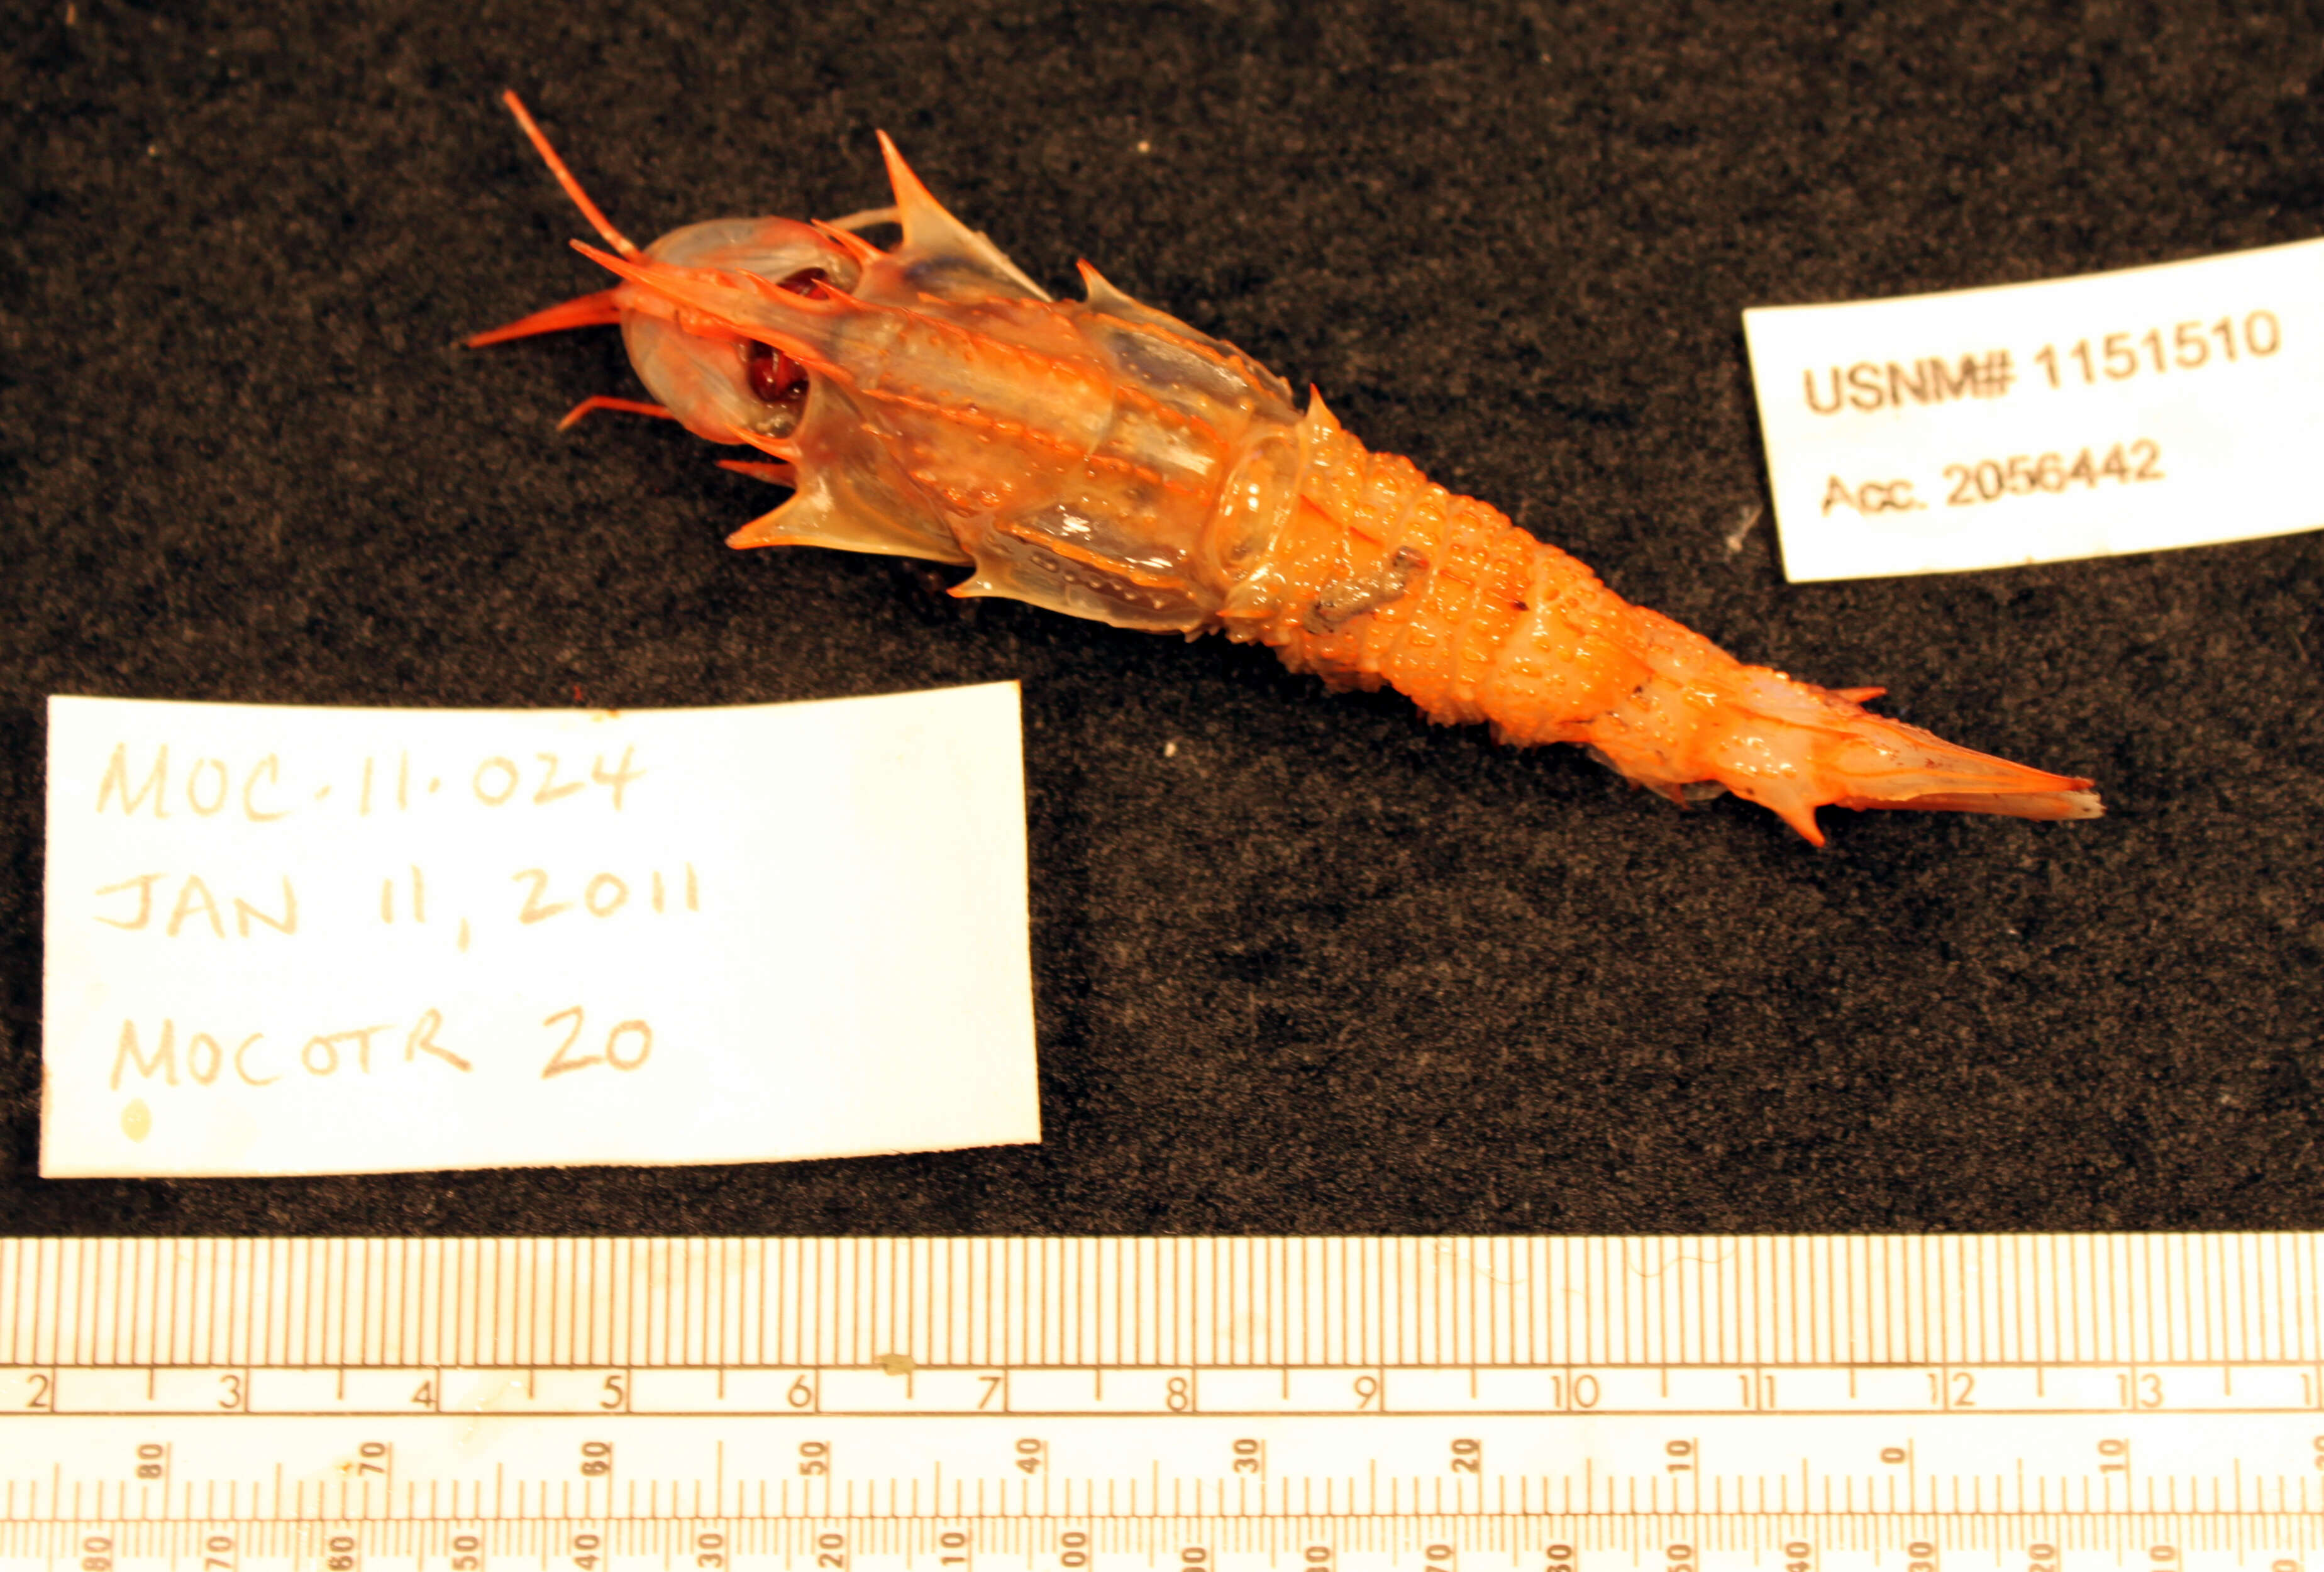 Image of armored shrimps